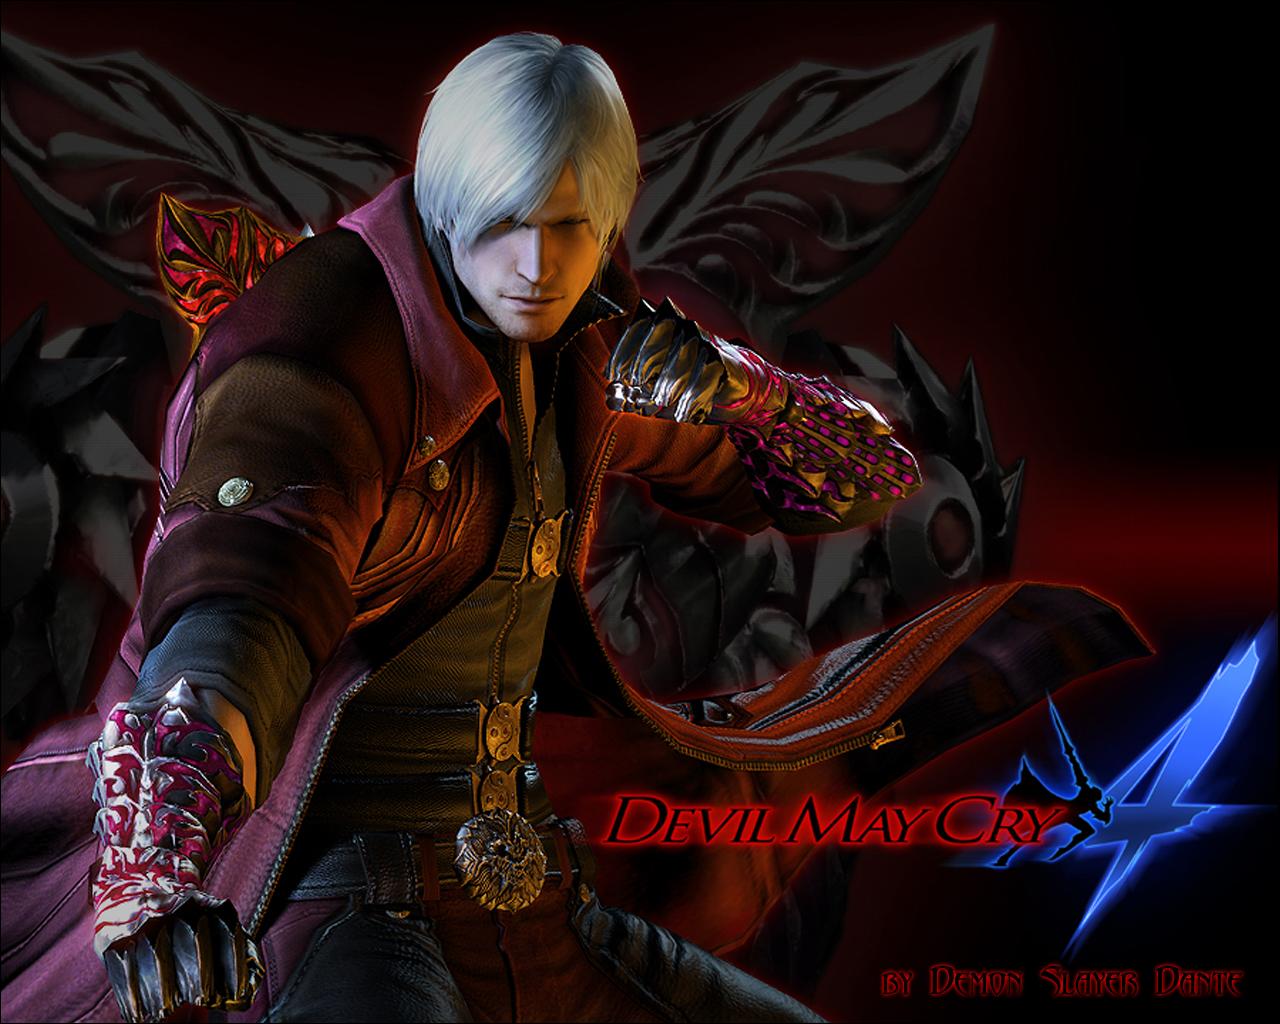 Devil May Cry 4 free Wallpapers 82 photos for your desktop